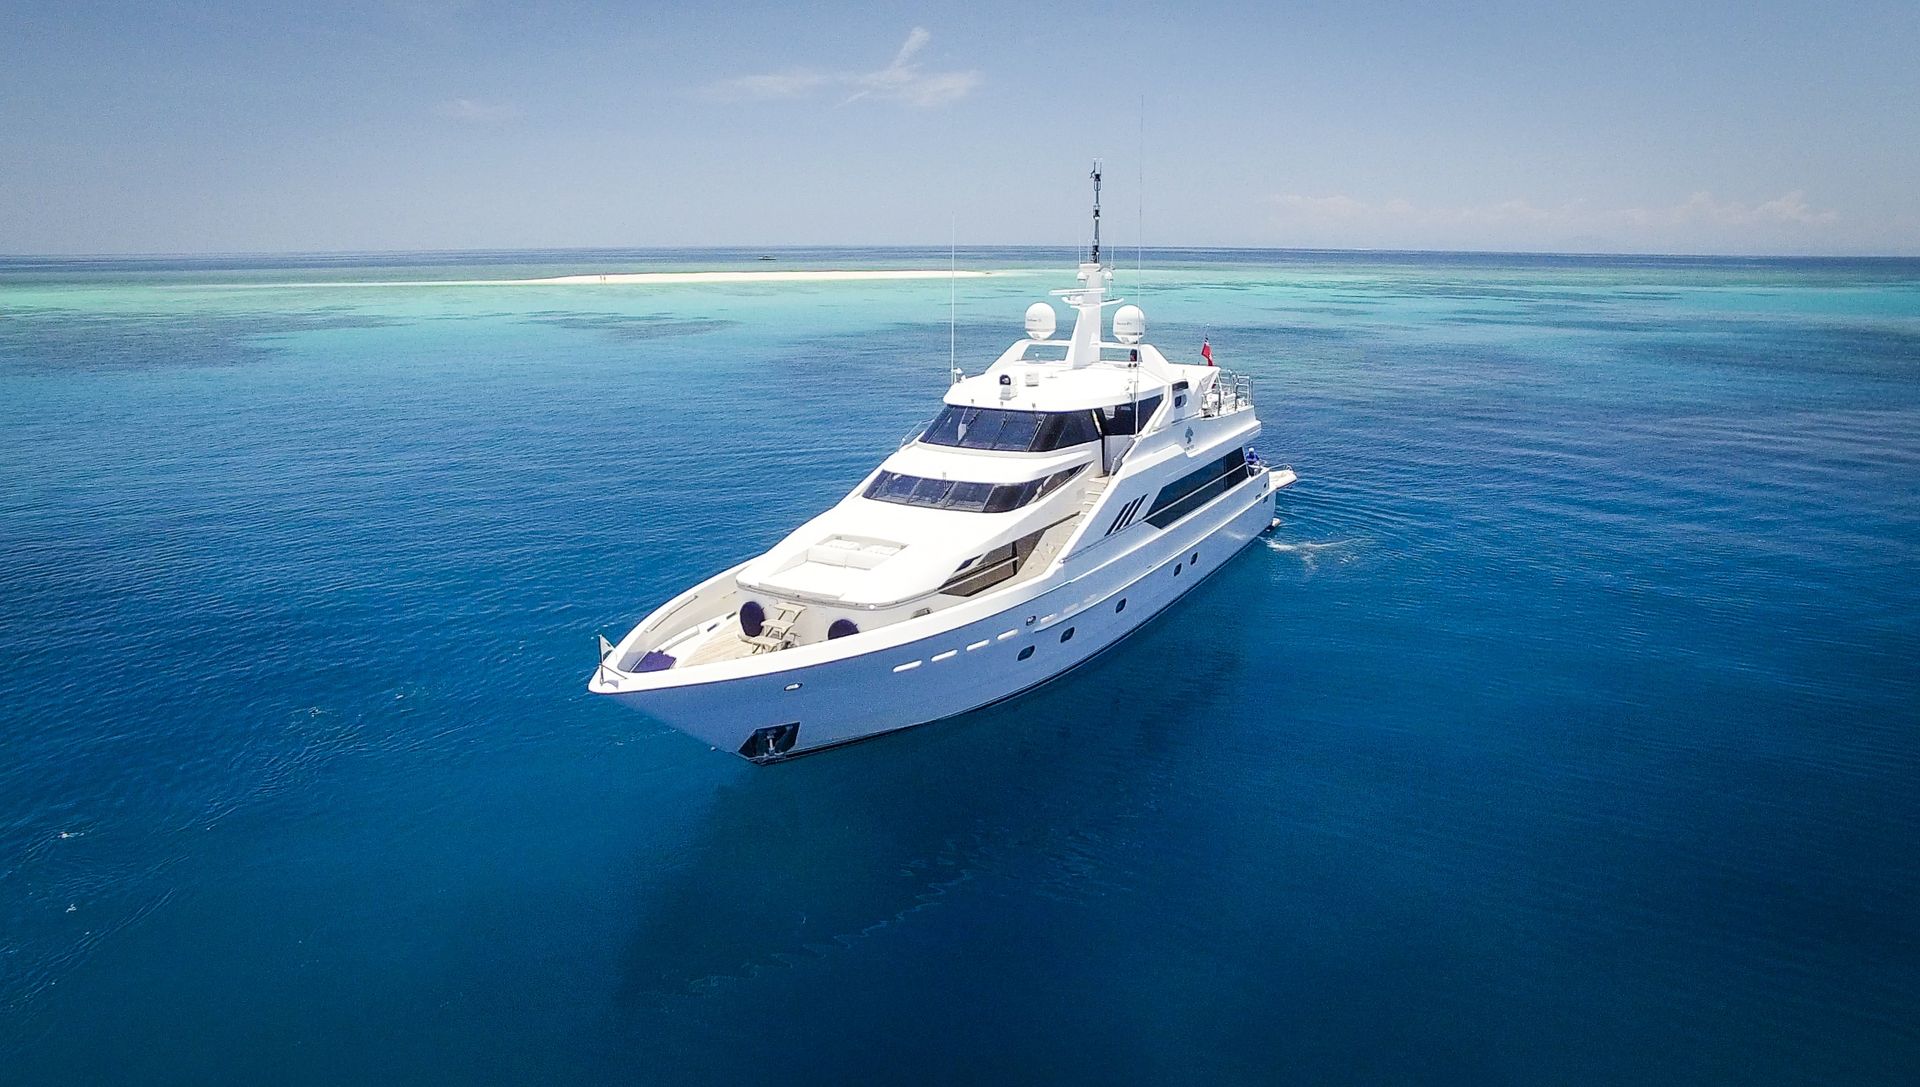 M.Y FLYING FISH | From $19,800 per day | 20 Guests